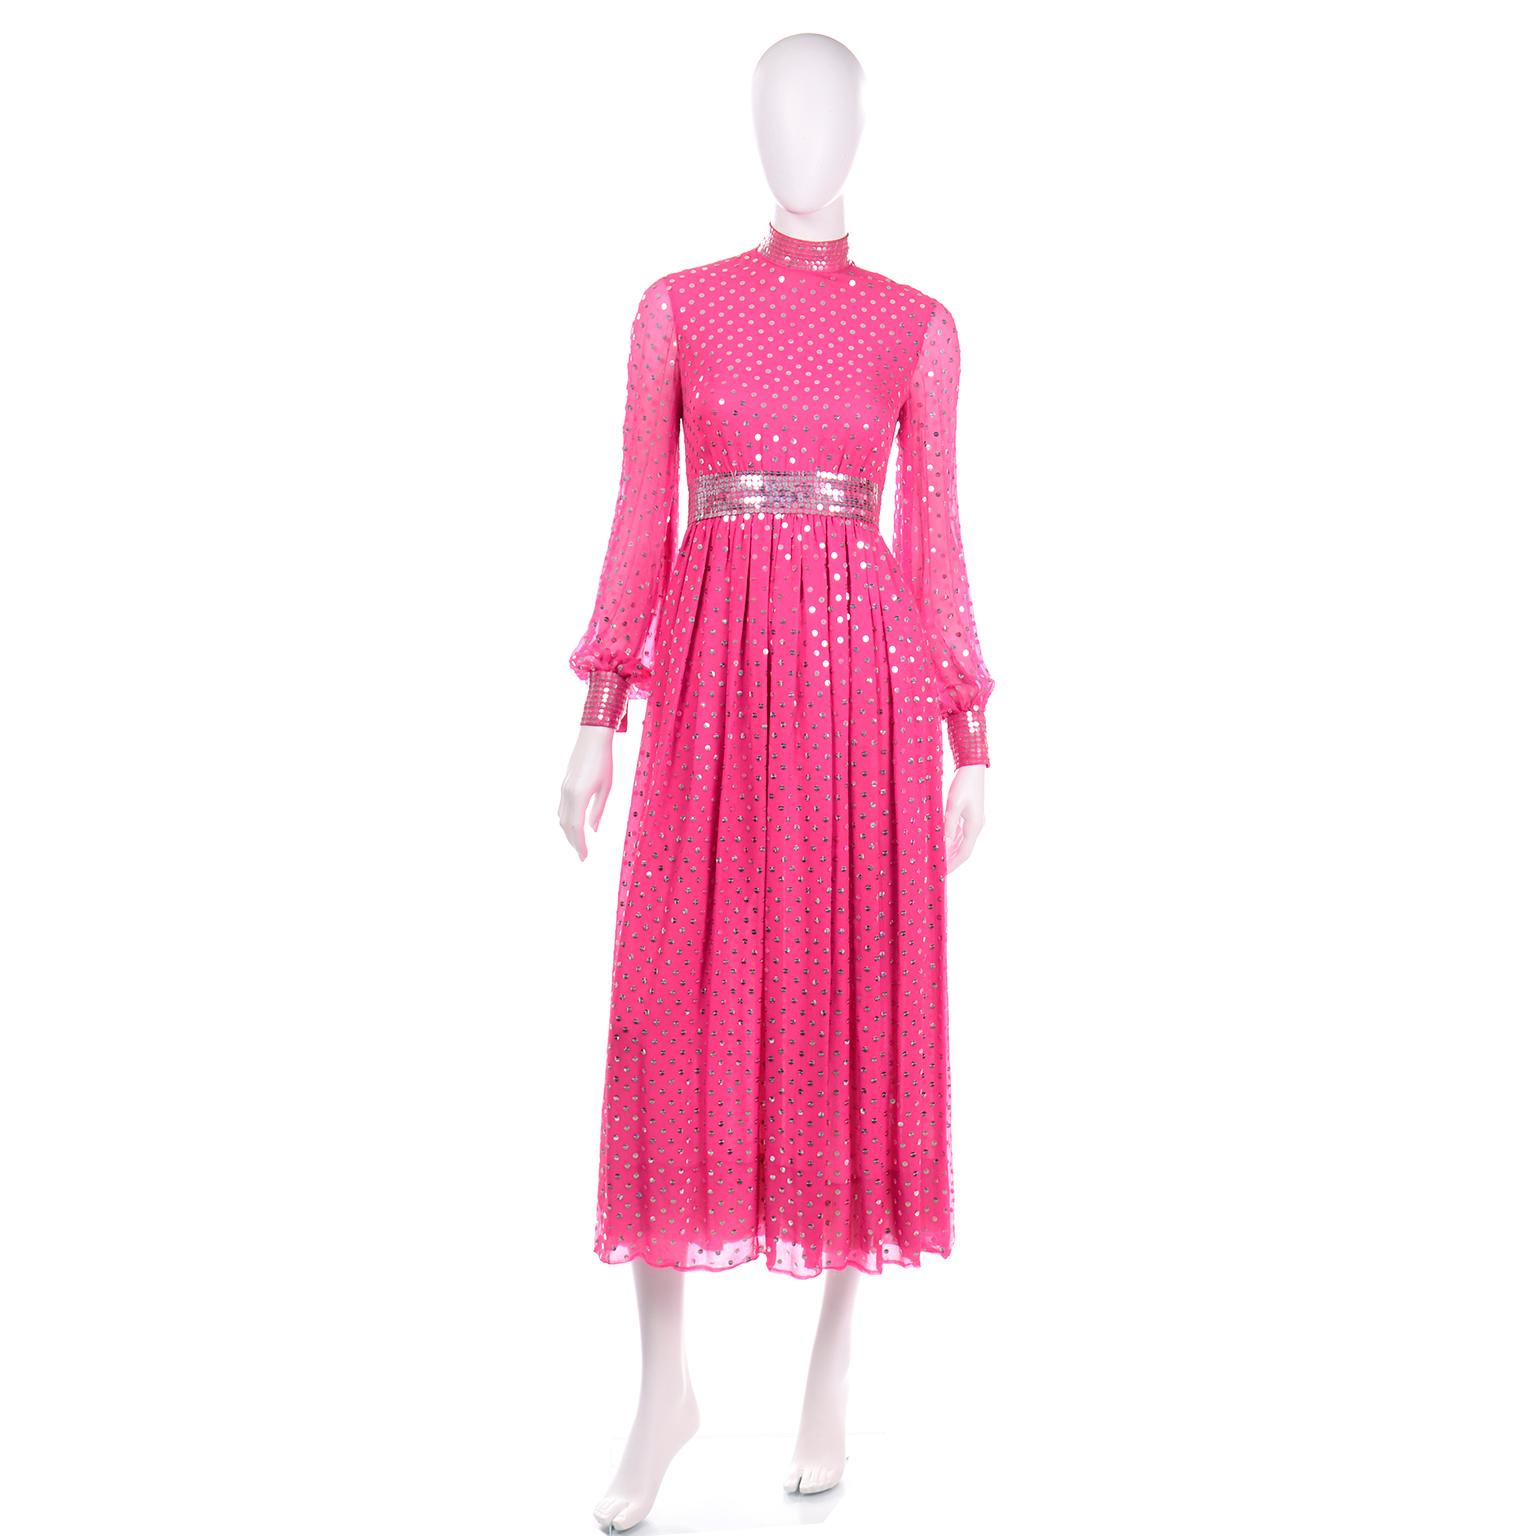 This vintage 1960's Norman Norell dress is beautifully made and is in pink silk embellished with beautiful silver and clear sequins that create a polka dot effect. The dress has a high neck, long, sheer sleeves, and is lined in a gorgeous nude silk